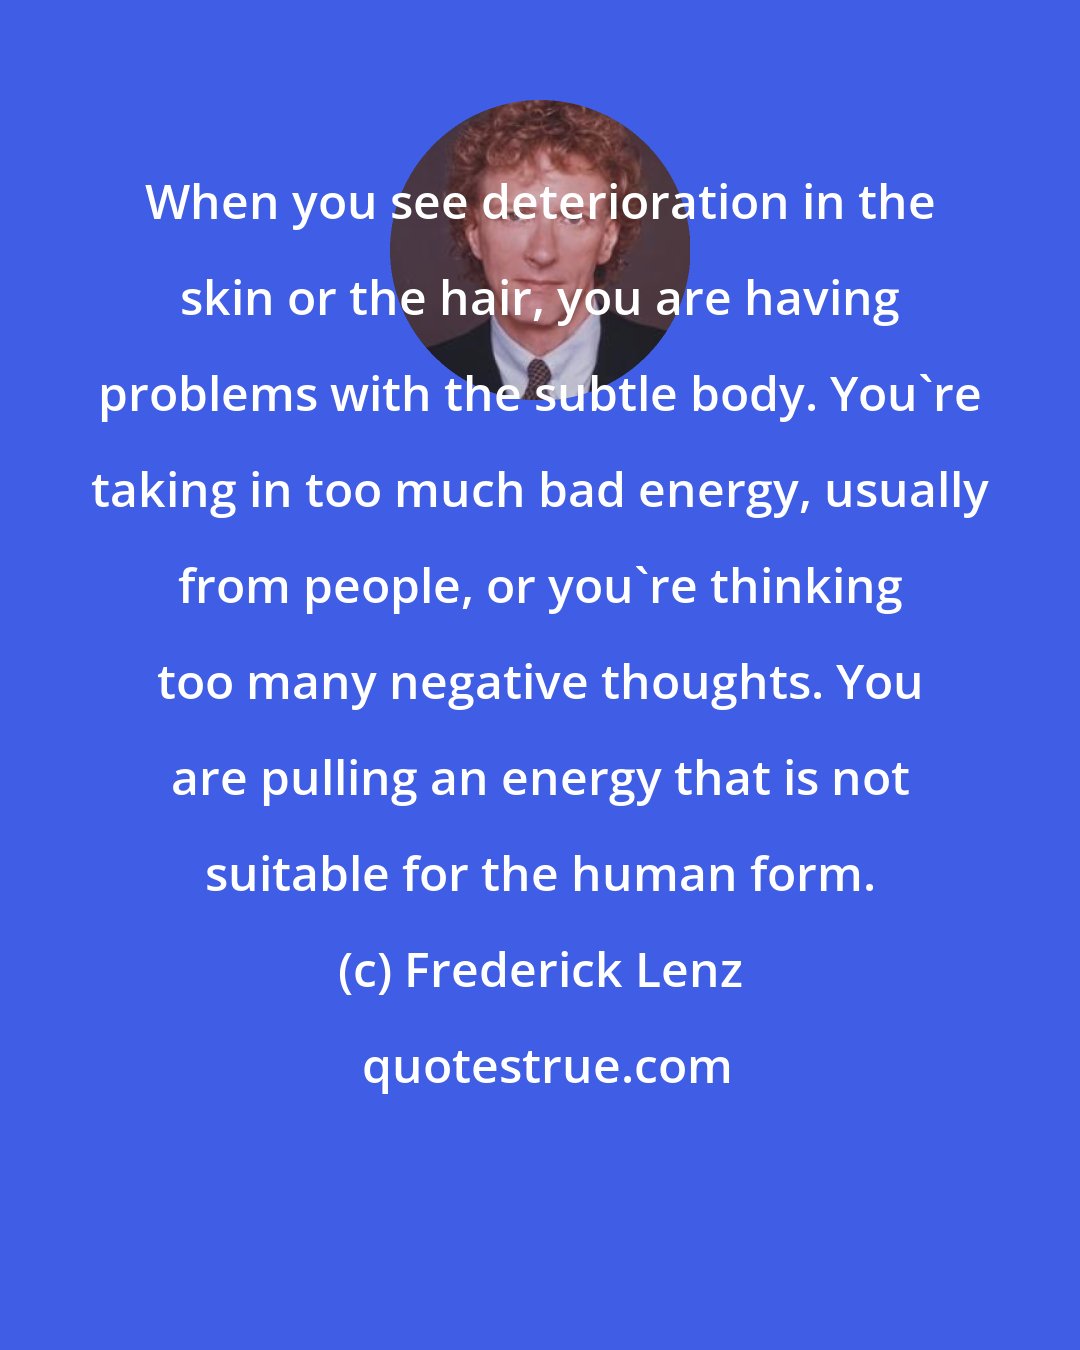 Frederick Lenz: When you see deterioration in the skin or the hair, you are having problems with the subtle body. You're taking in too much bad energy, usually from people, or you're thinking too many negative thoughts. You are pulling an energy that is not suitable for the human form.